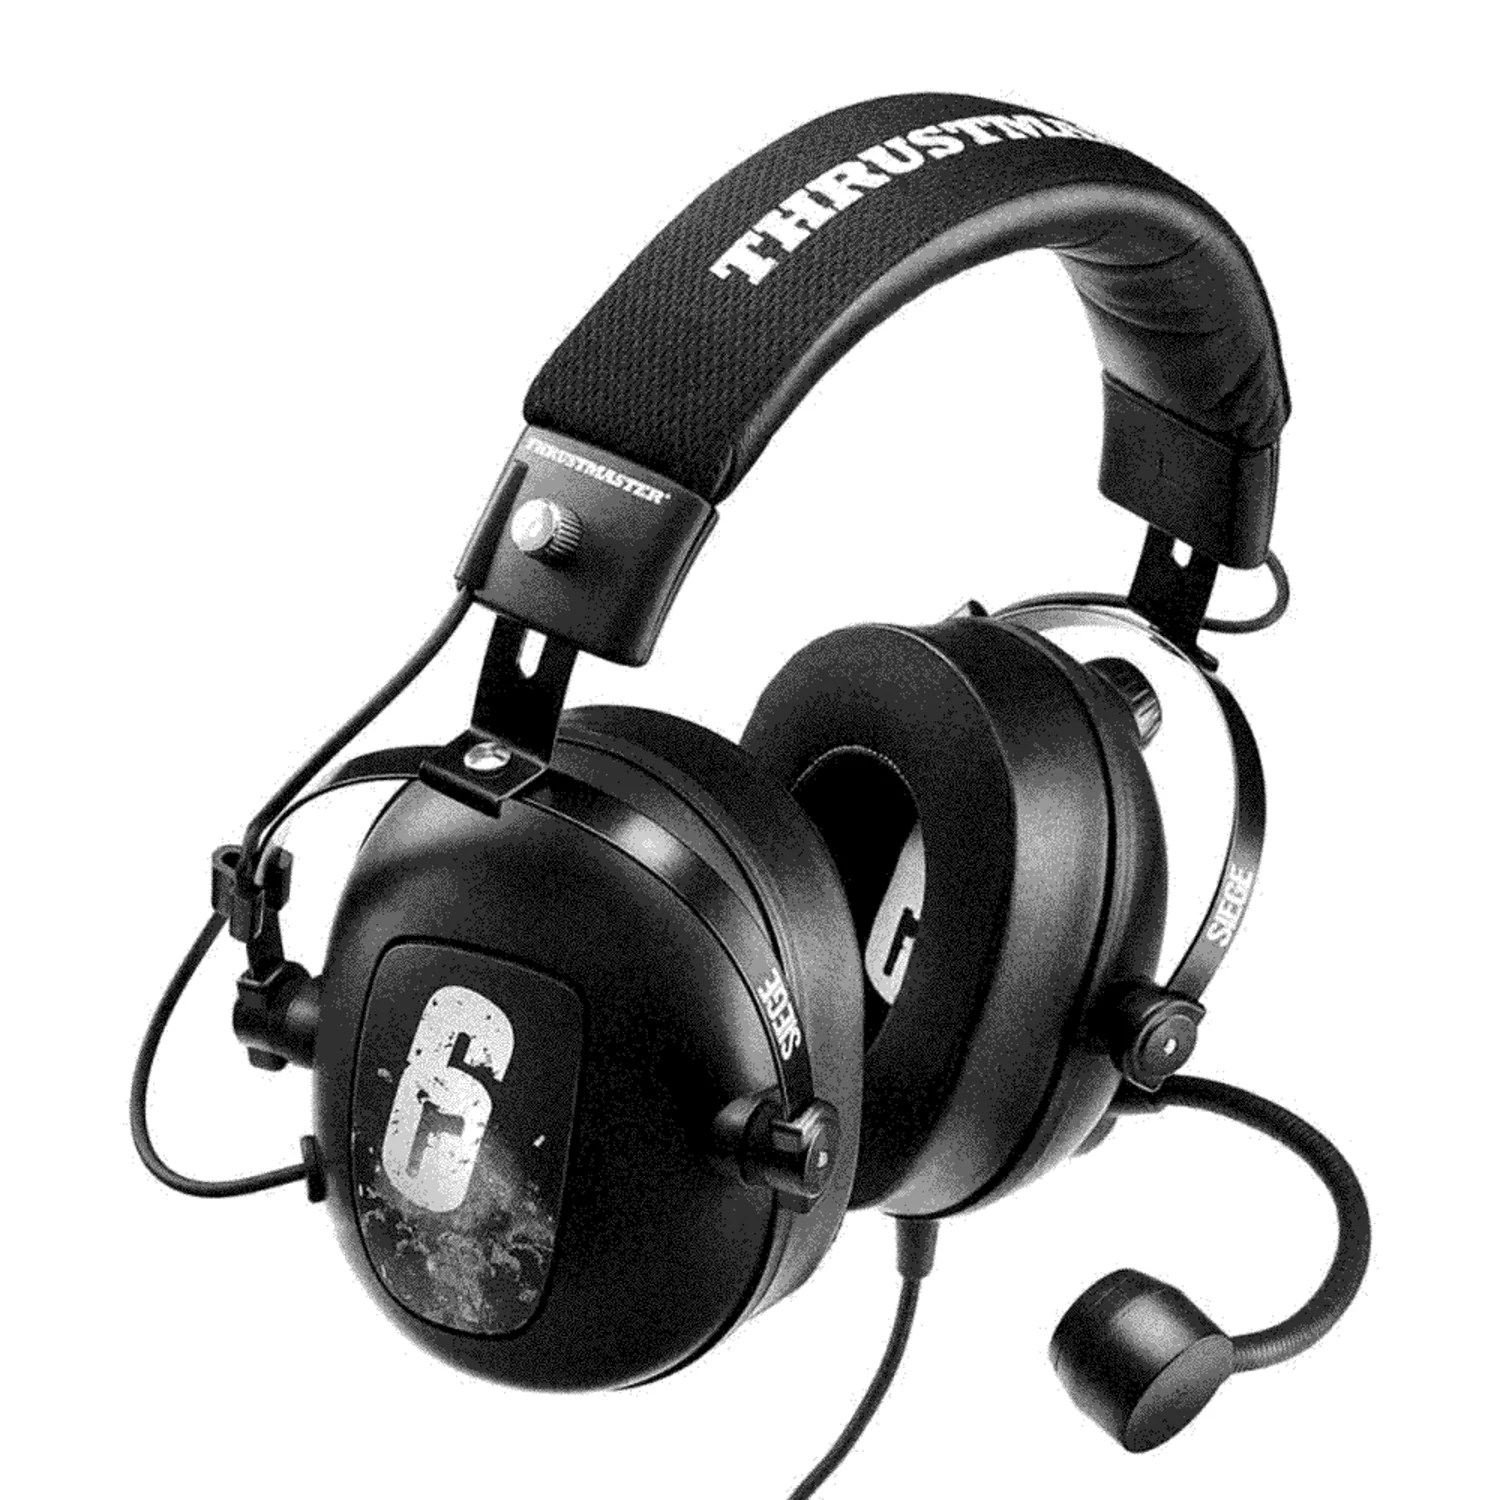 Headset Gamer Thrustmaster T.Assault Six Collection Edition para PC / Xbox / PS4